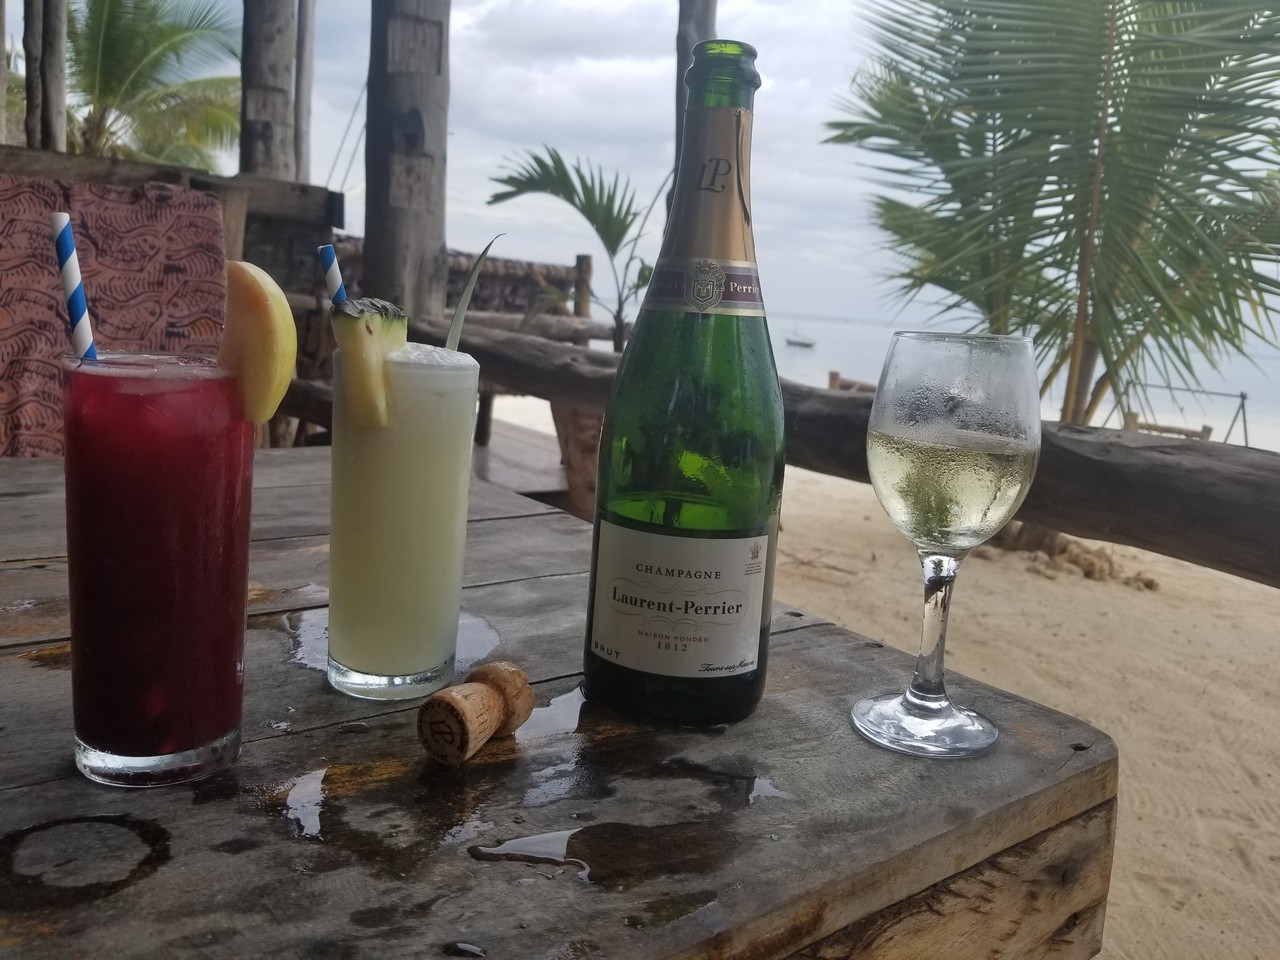 a bottle of champagne and two glasses of wine on a wooden table